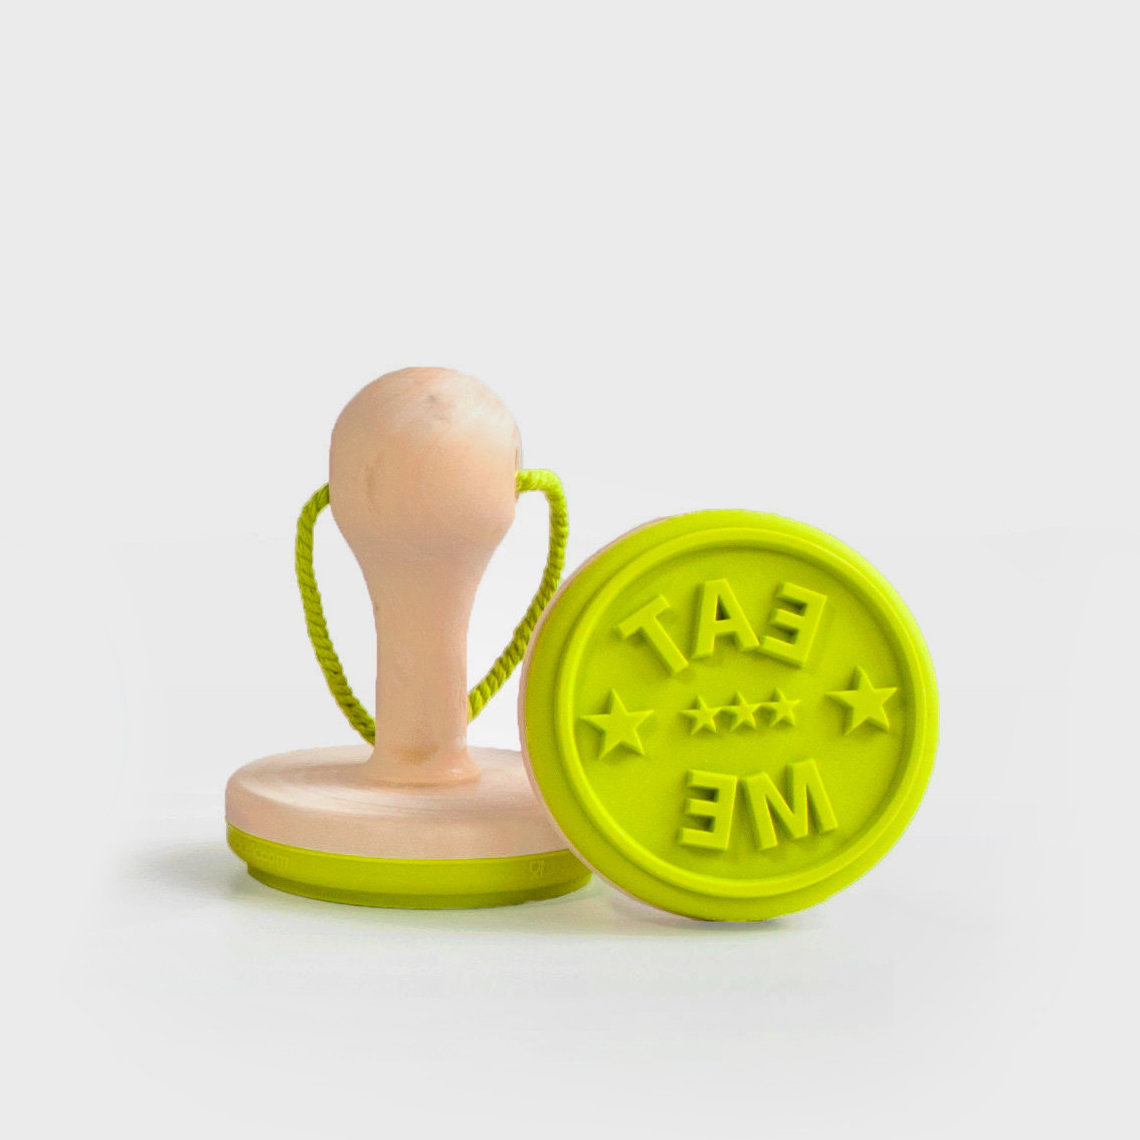 Cookie Stamp - Eat Me - Lime Green